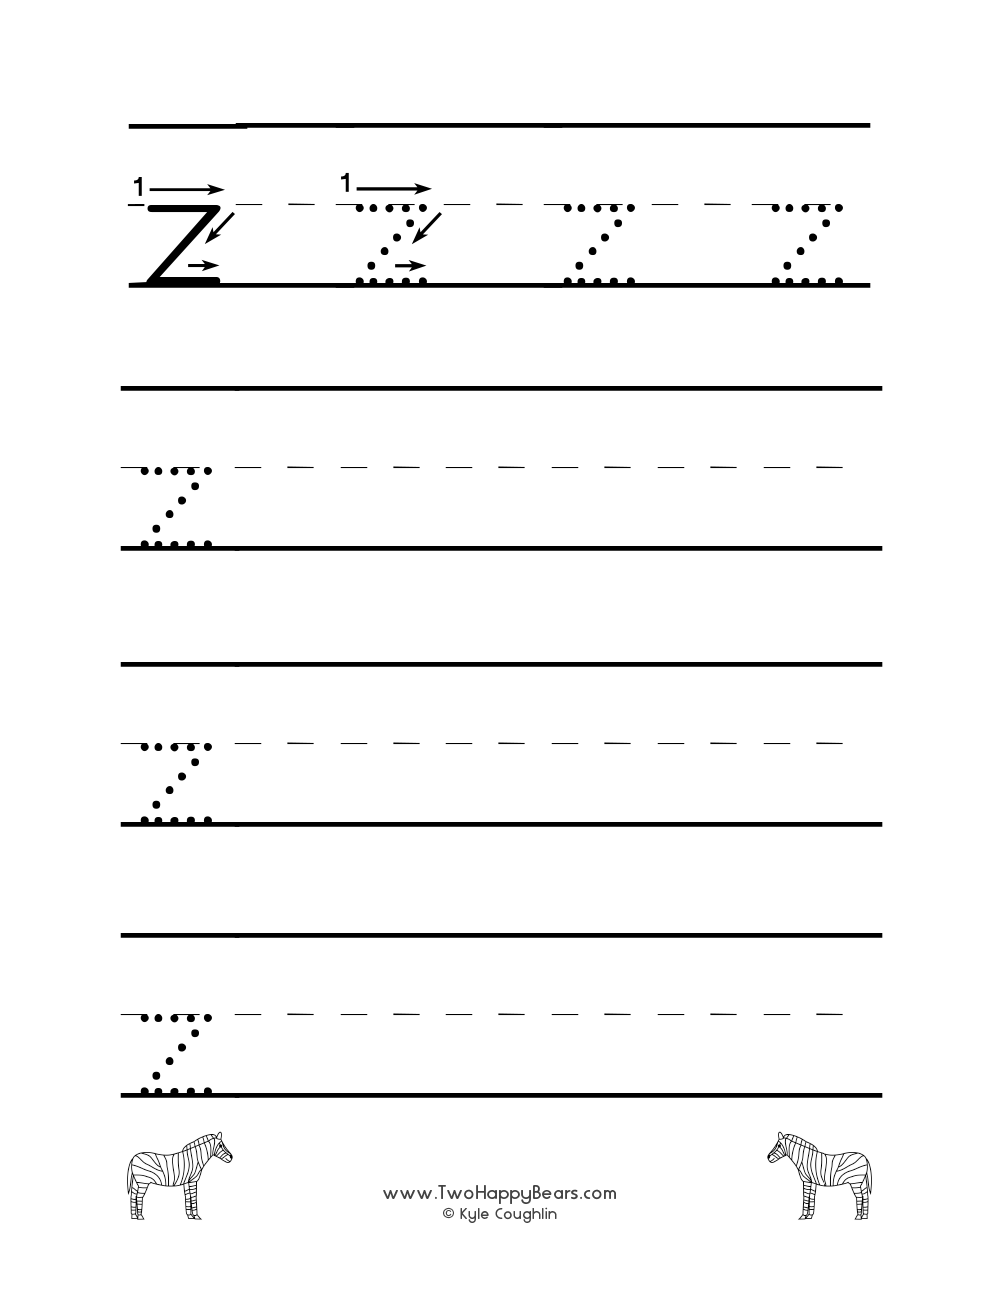 Worksheet for tracing and writing the lowercase letter Z, in free printable PDF format.